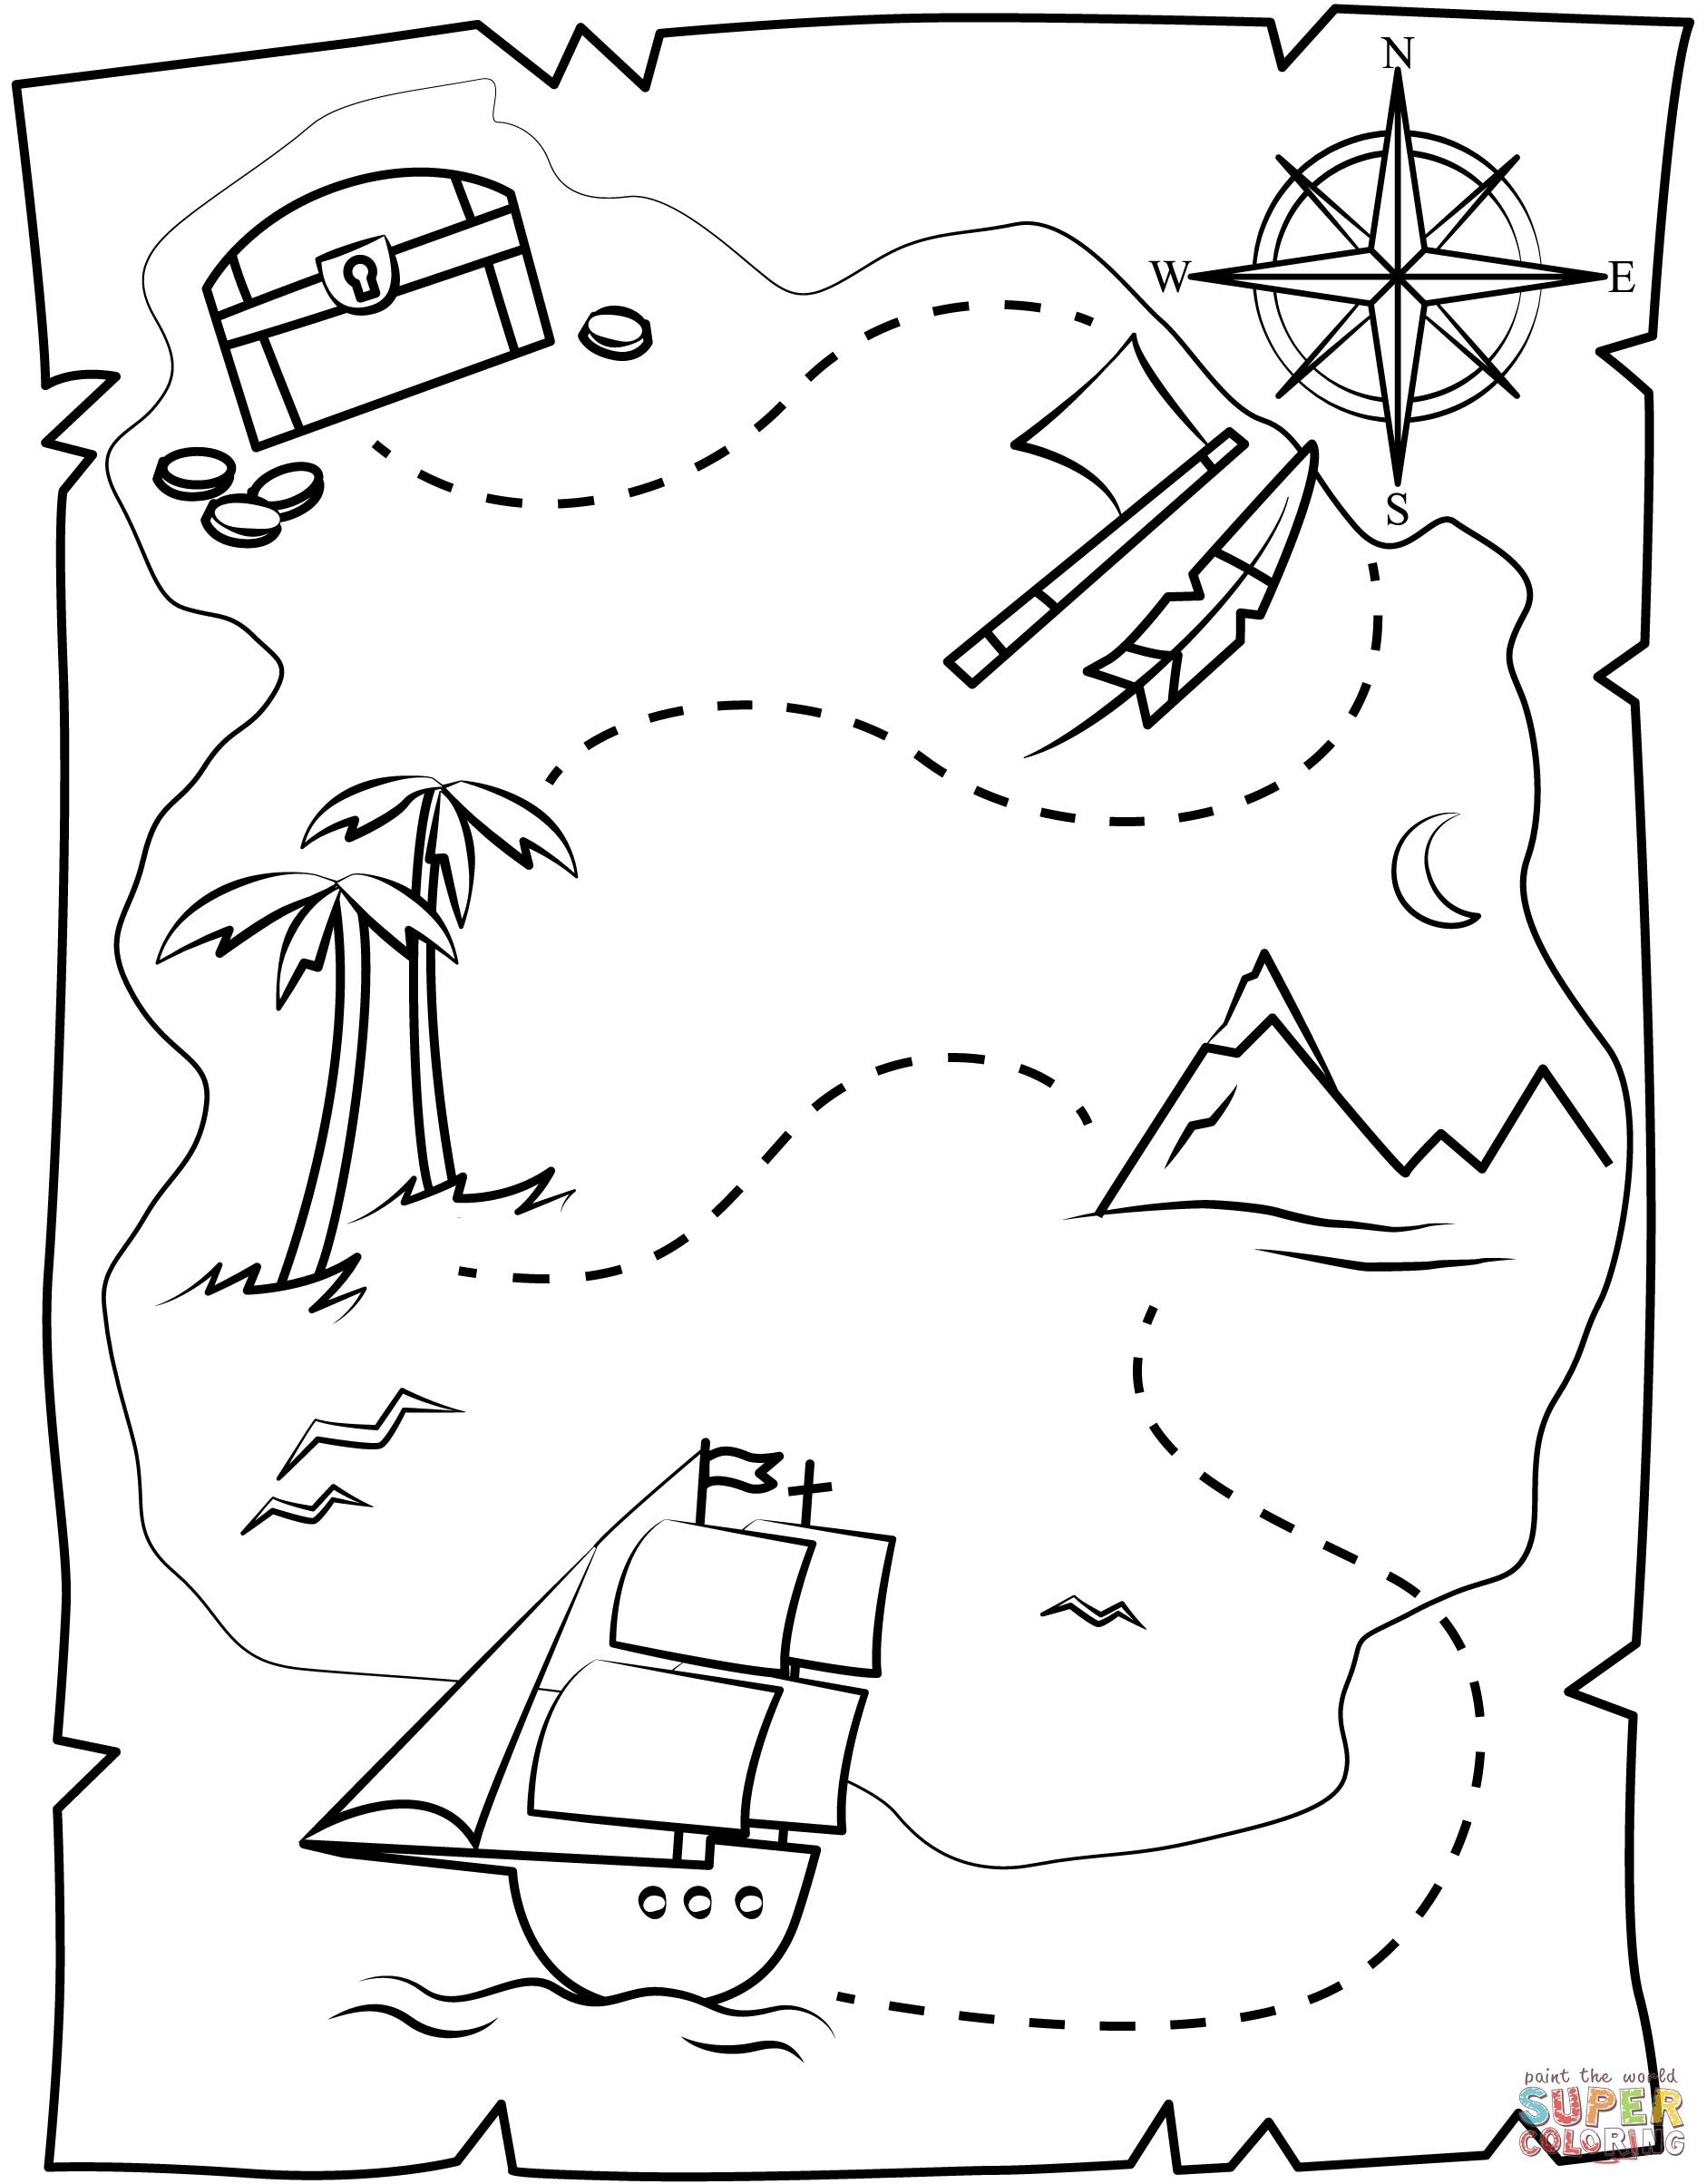 Treasure chest map coloring page free printable coloring pages